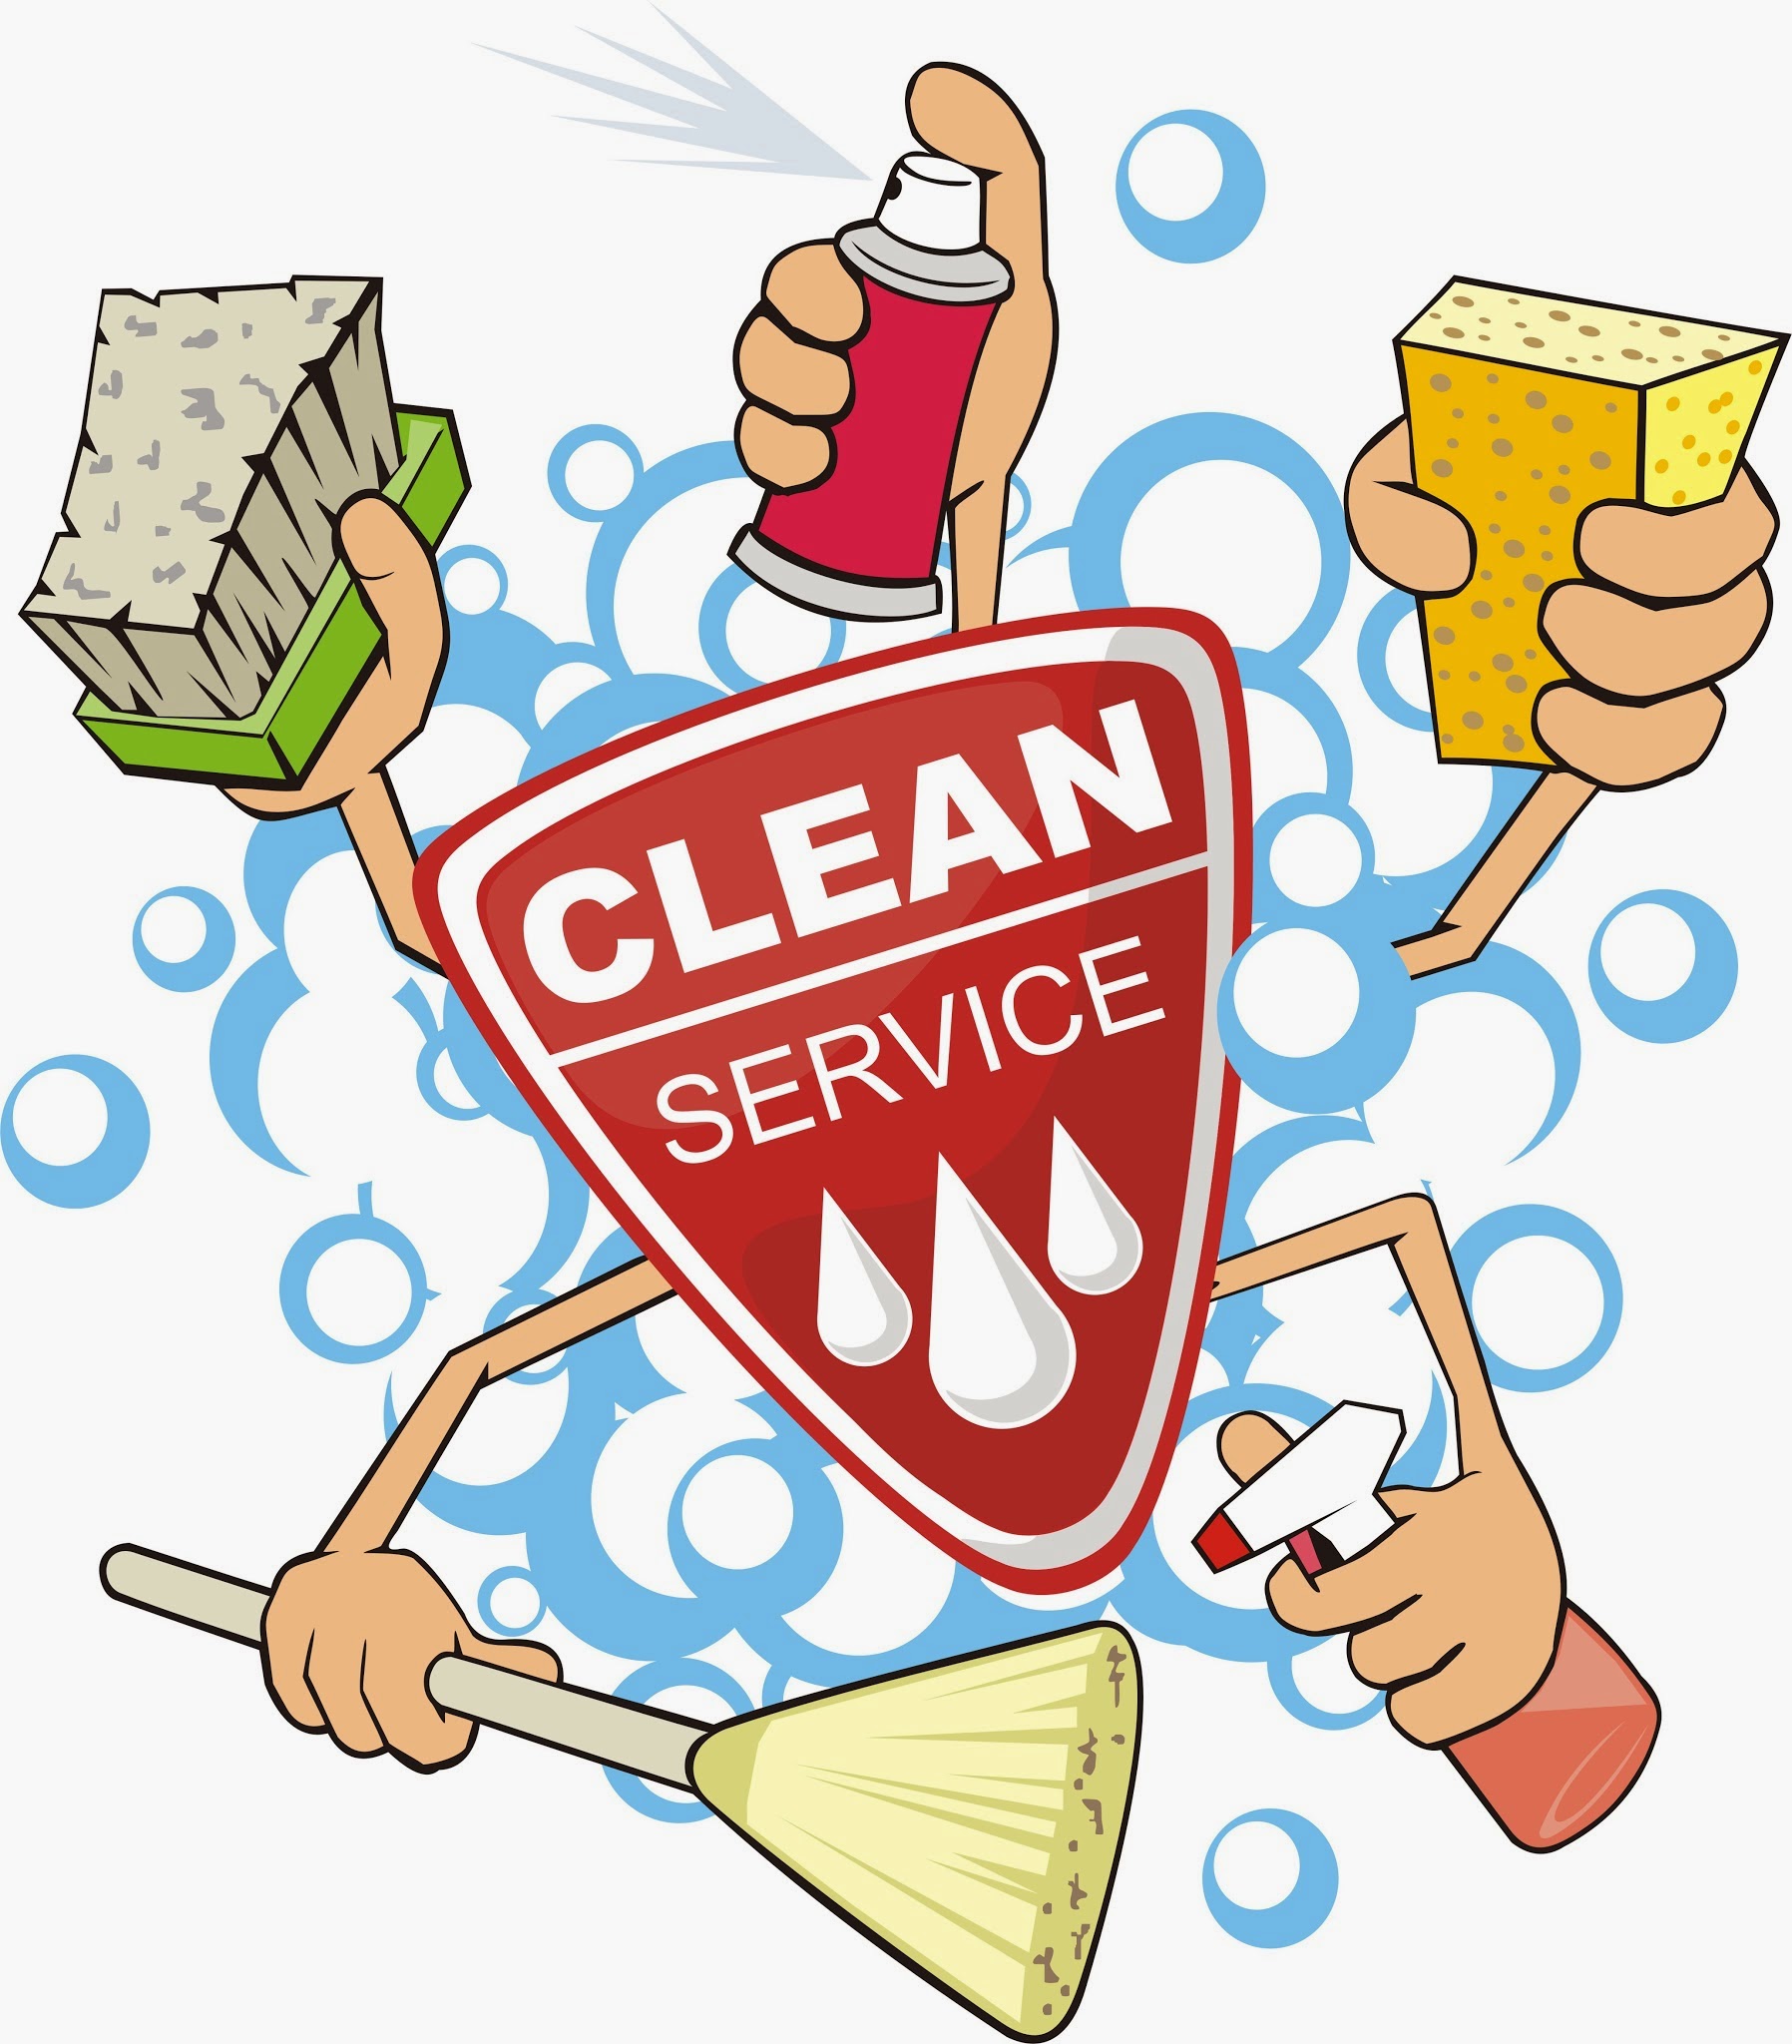 Starting A Small Cleaning Business In Houston - House Of Health